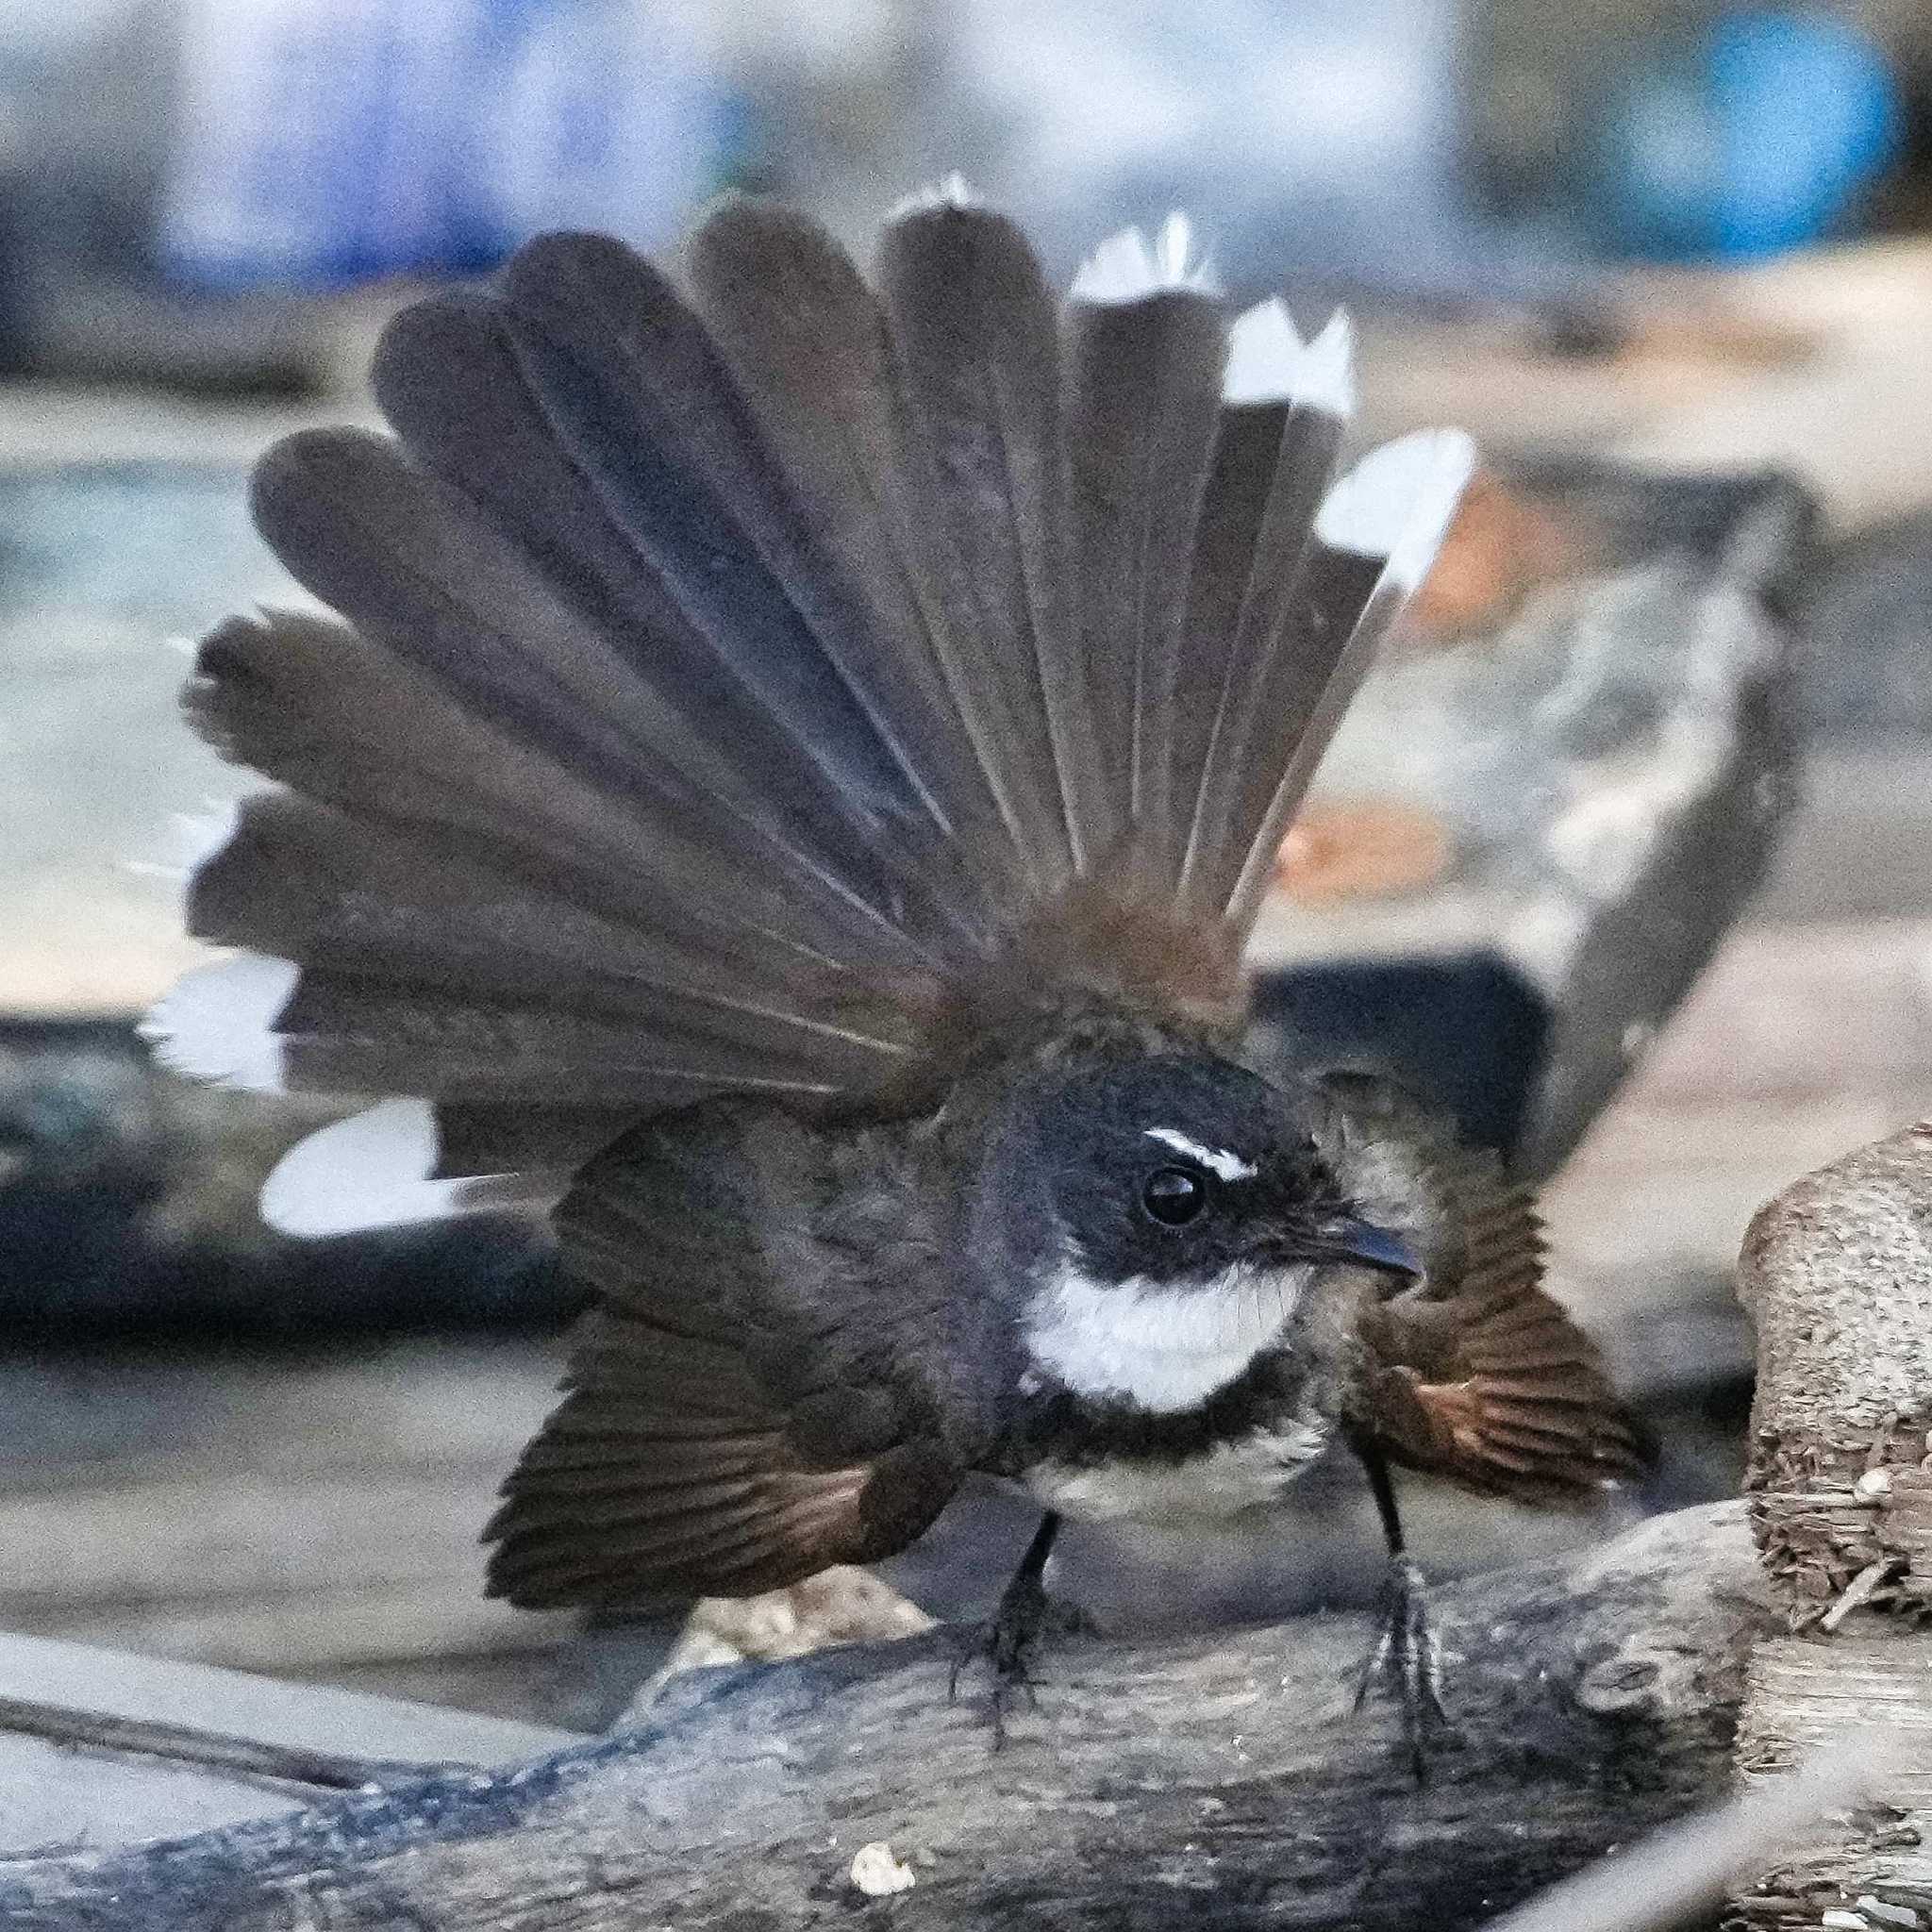 Malaysian Pied Fantail